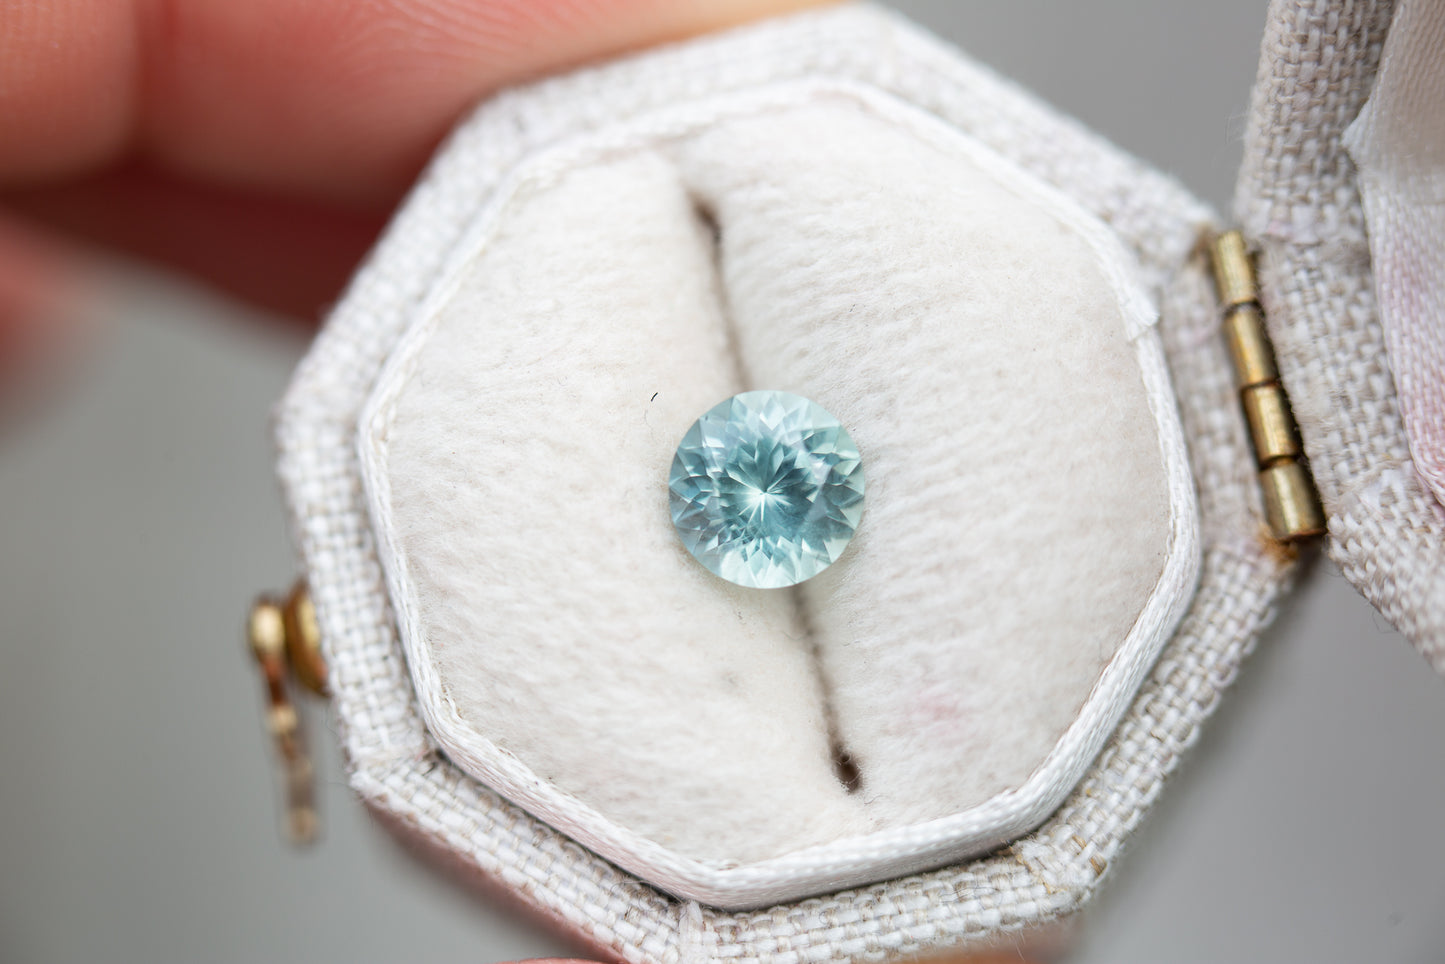 Load image into Gallery viewer, 1.02ct round light teal blue sapphire
